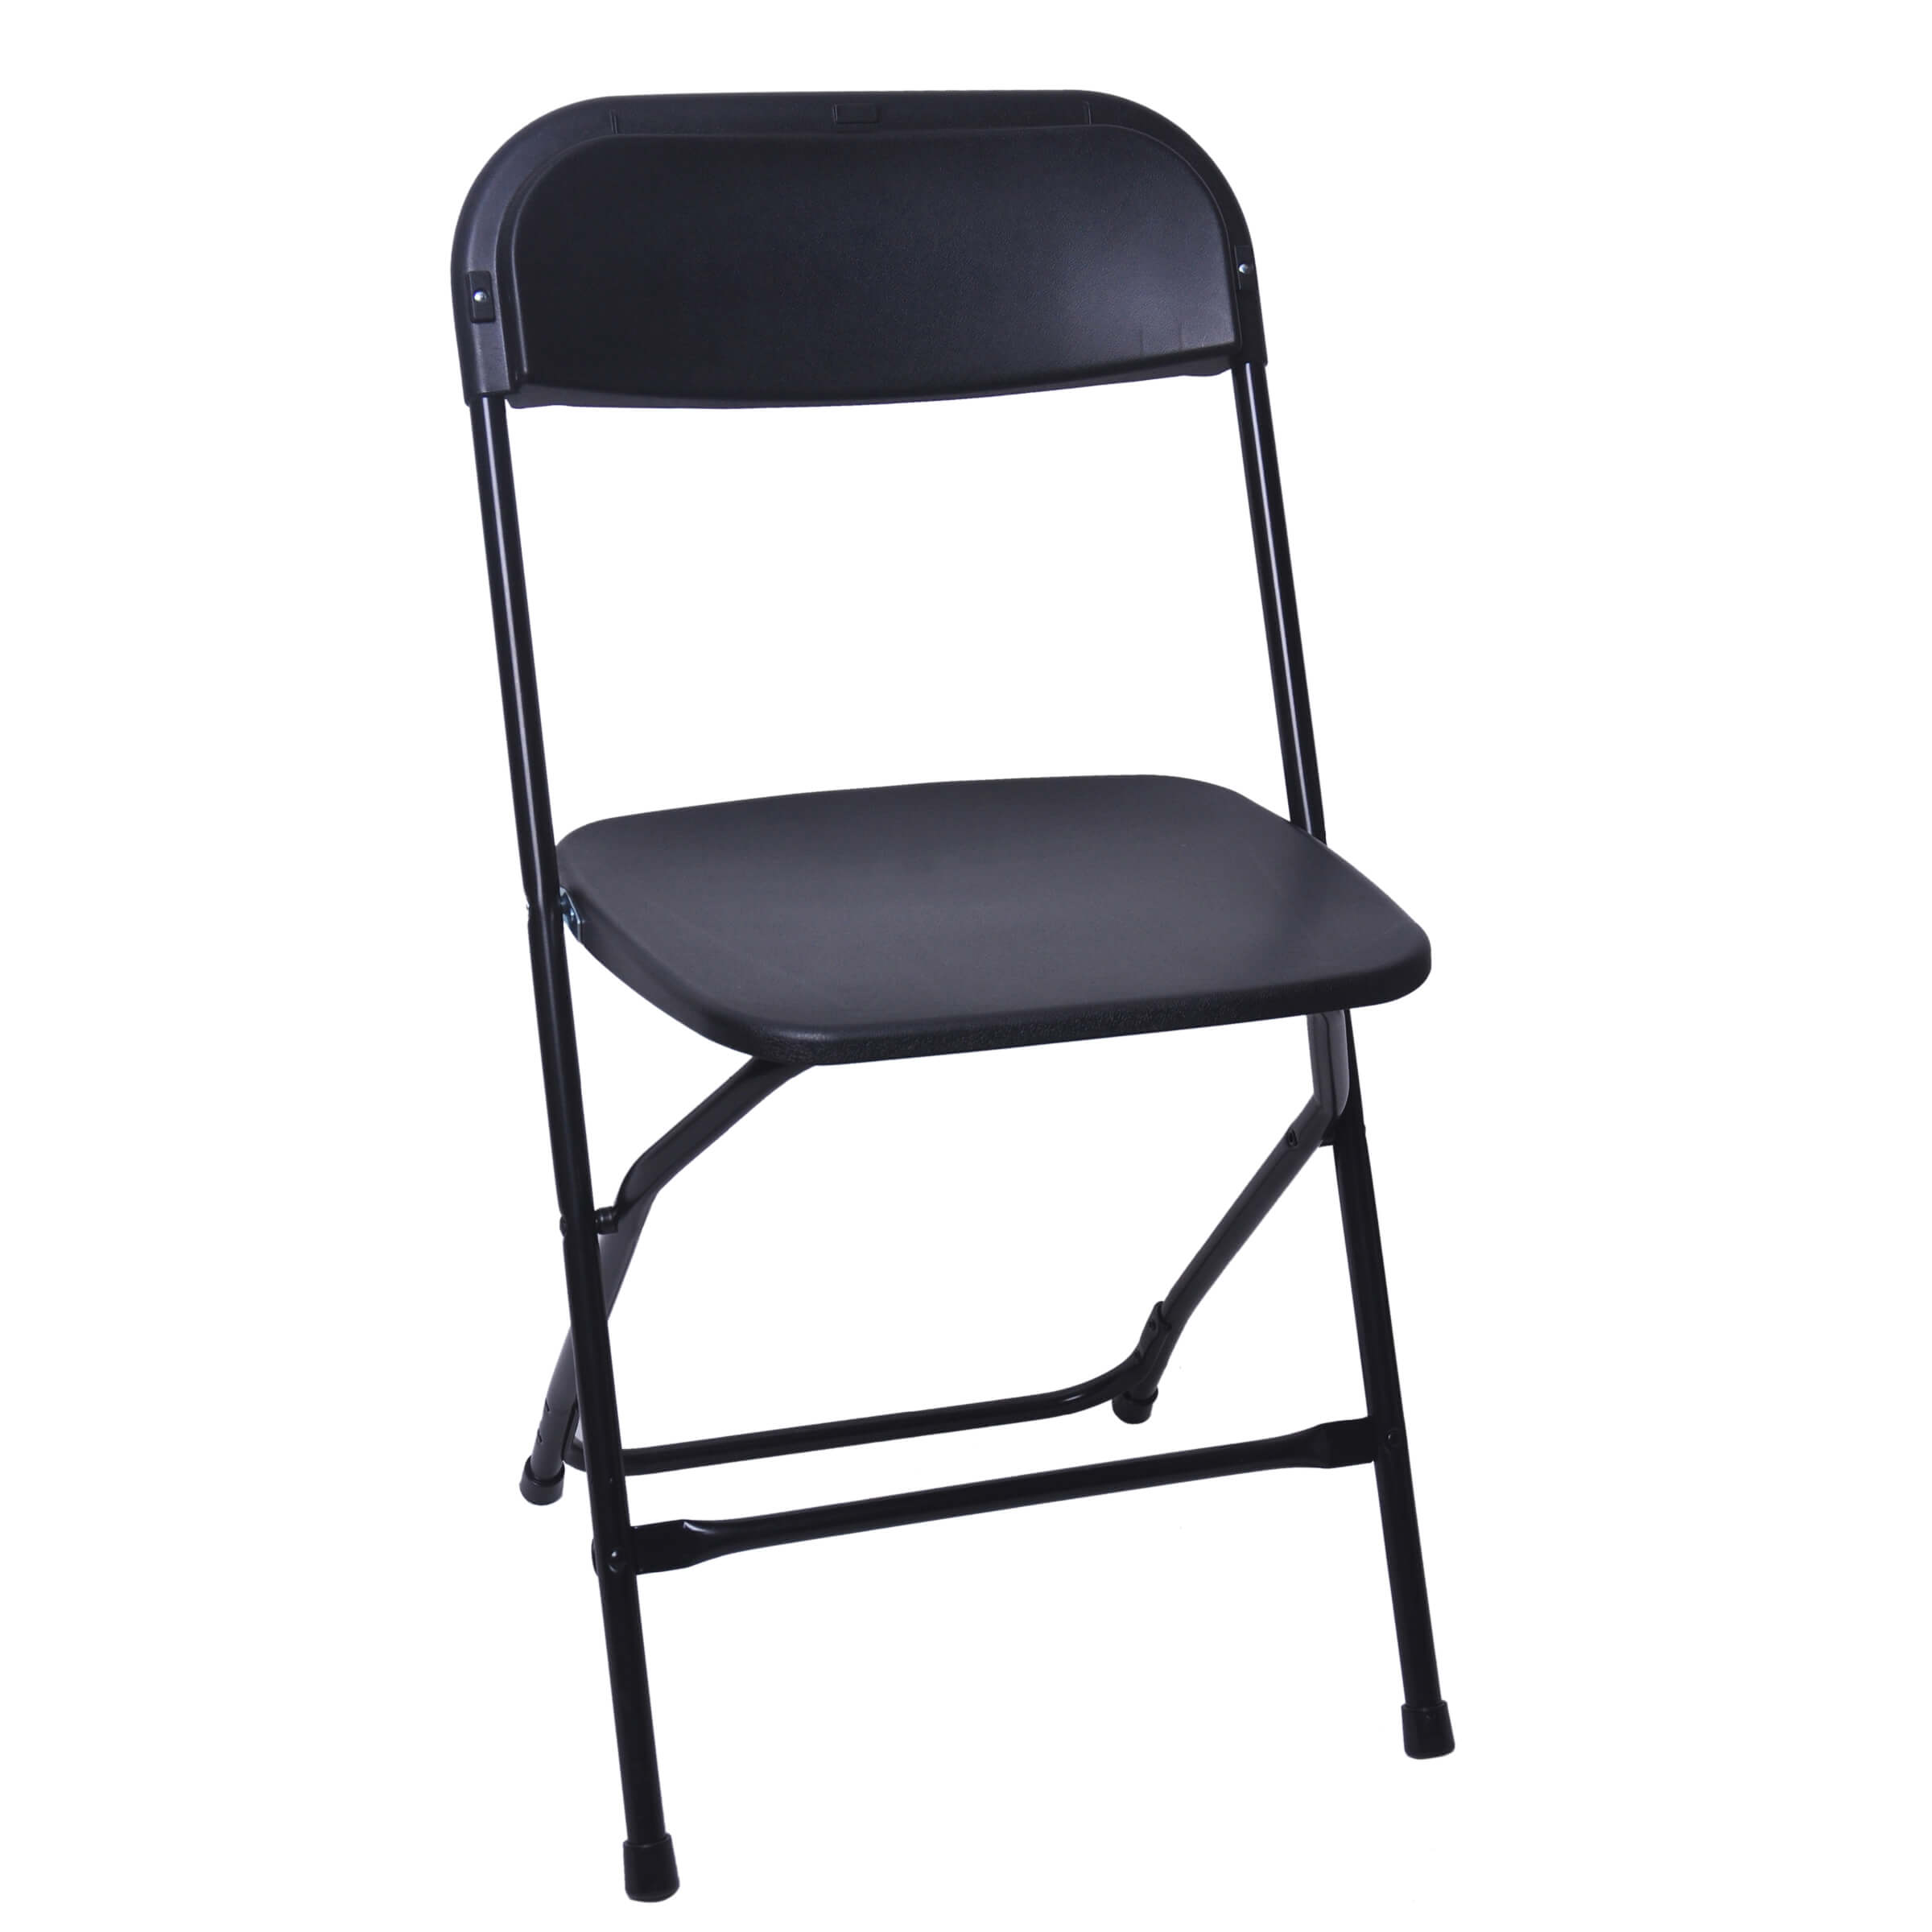 Plastic Folding Chairs Wholesale Bulk Poly Folding Chairs For Sale